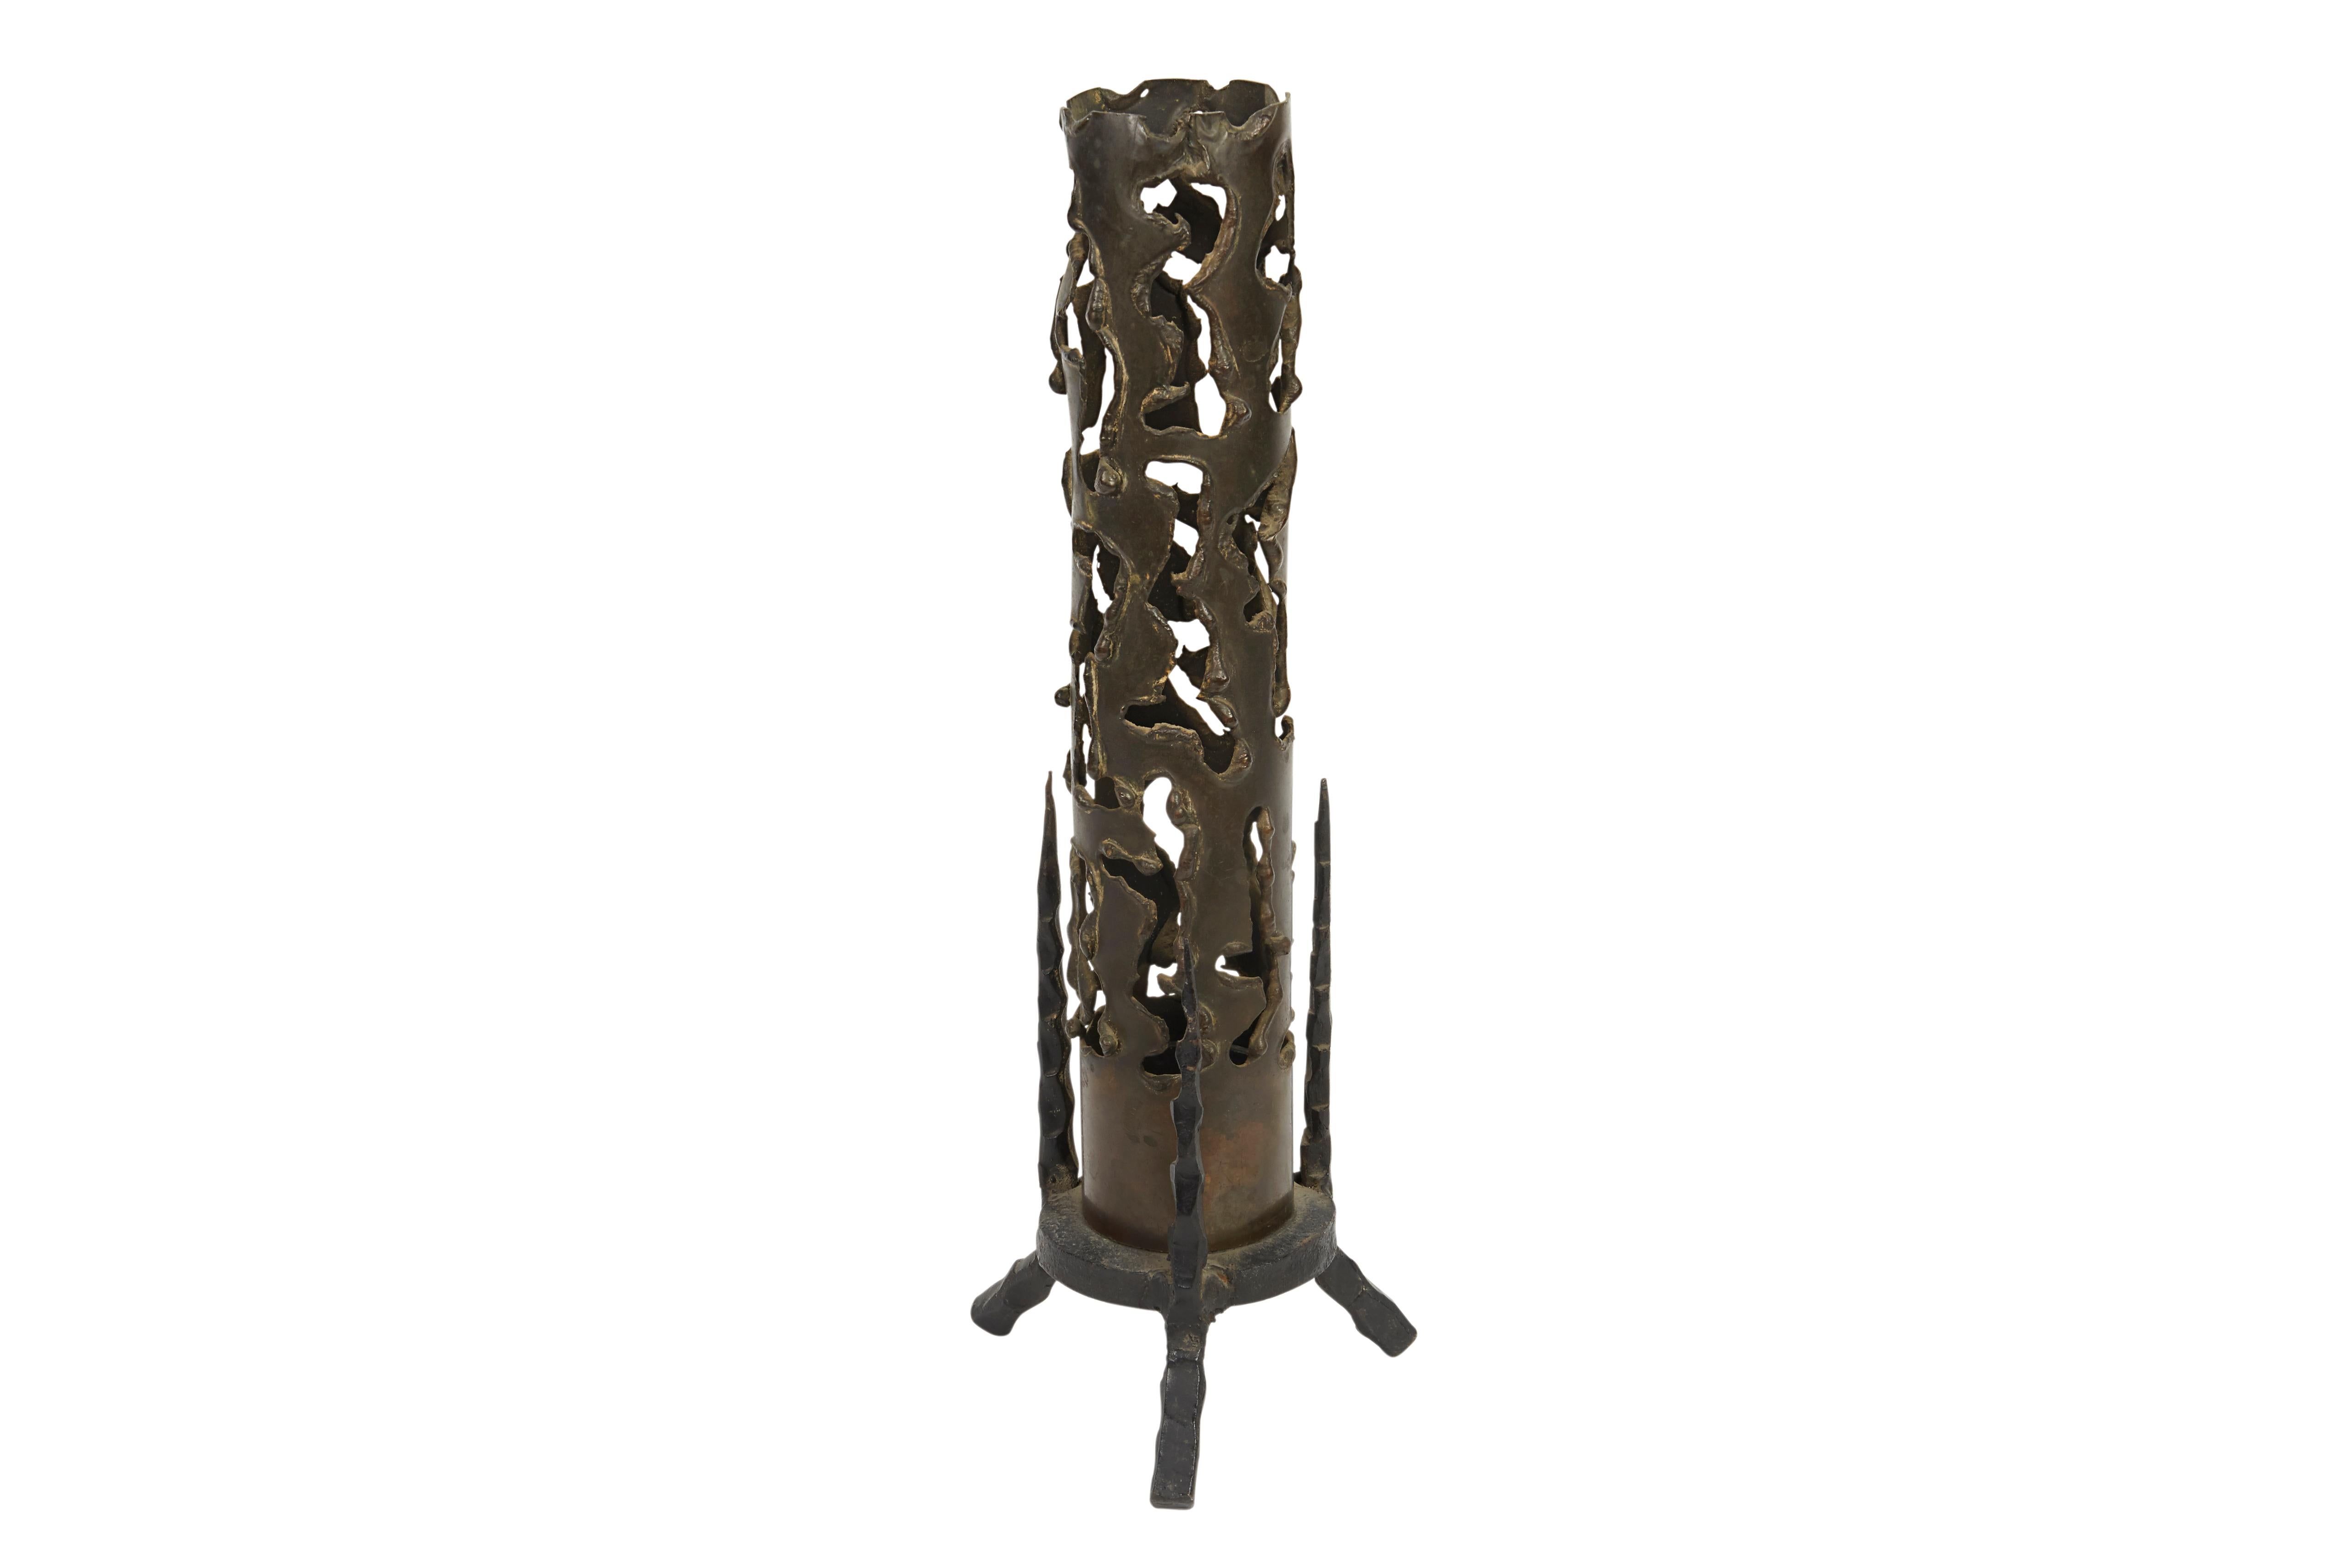 Pierced brass cylinder and iron base form this beautiful Memorial candle, crafted in brutalist style by David Palombo. Reminiscent of the Pillar of Fire, which provides a scared element to this ritual object, the length of the holder allows the